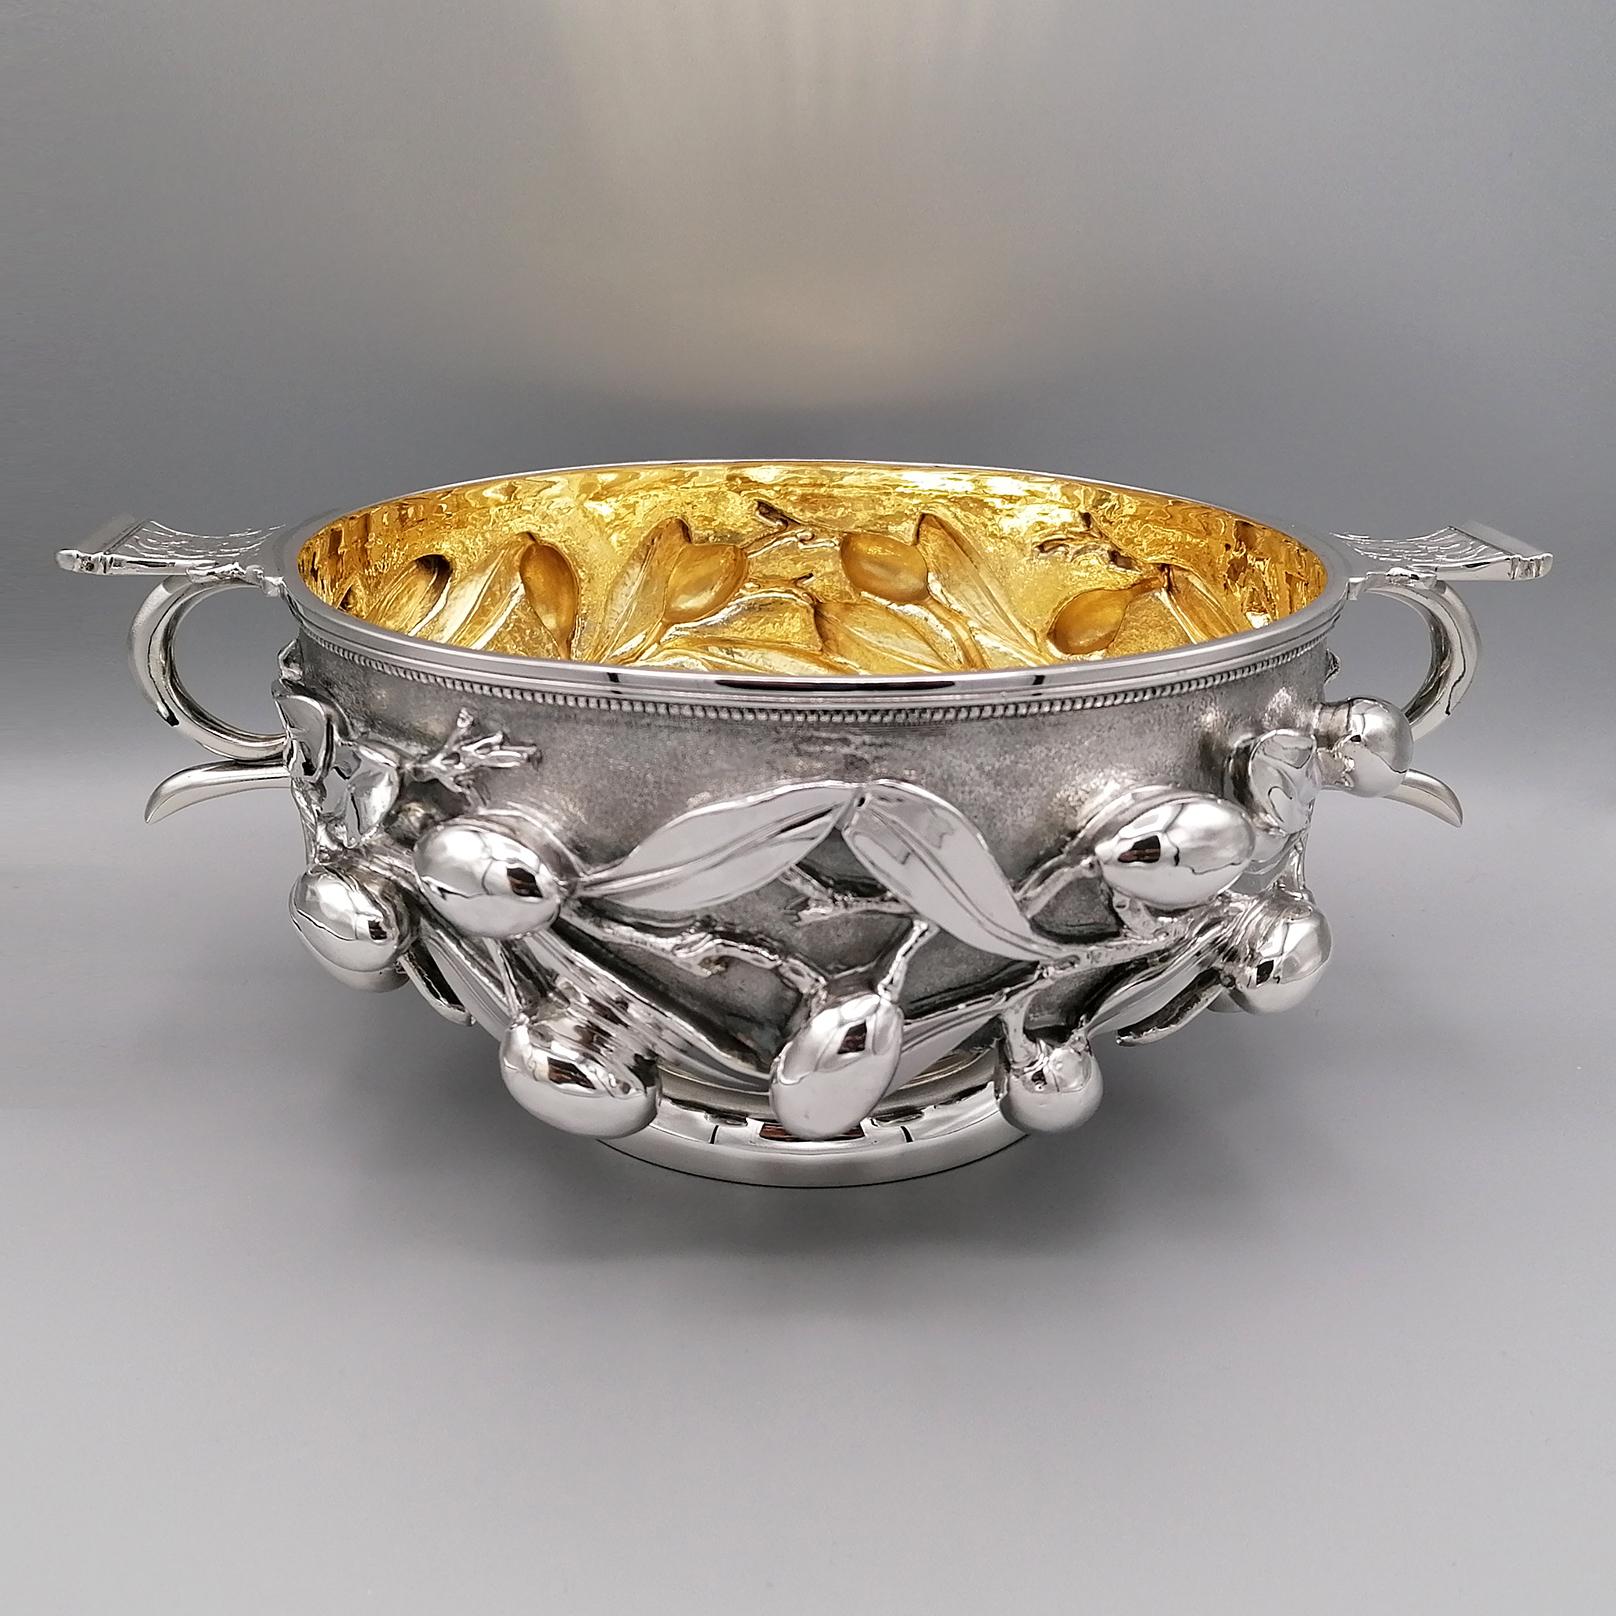 Exceptional silver center piece made in Milan in the 70s of the last century.
It is an exact copy of a Roman centerpiece or cup with handles found in Boscoreale not far from Pompeii. The original with all the other silver objects are in the